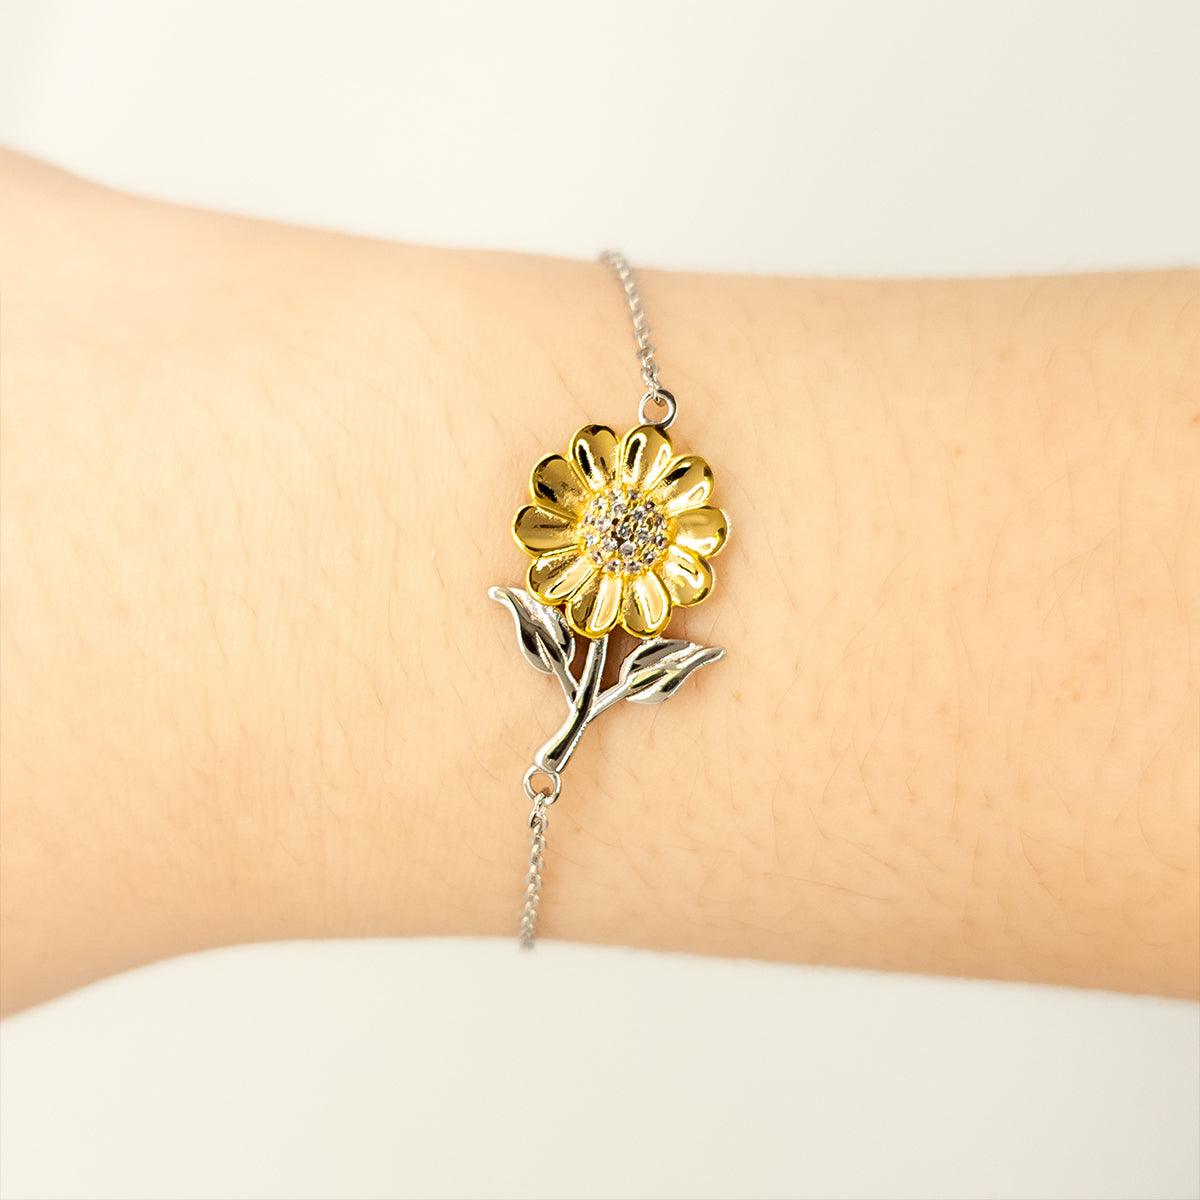 Remarkable Oil Worker Gifts, Your dedication and hard work, Inspirational Birthday Christmas Unique Sunflower Bracelet For Oil Worker, Coworkers, Men, Women, Friends - Mallard Moon Gift Shop